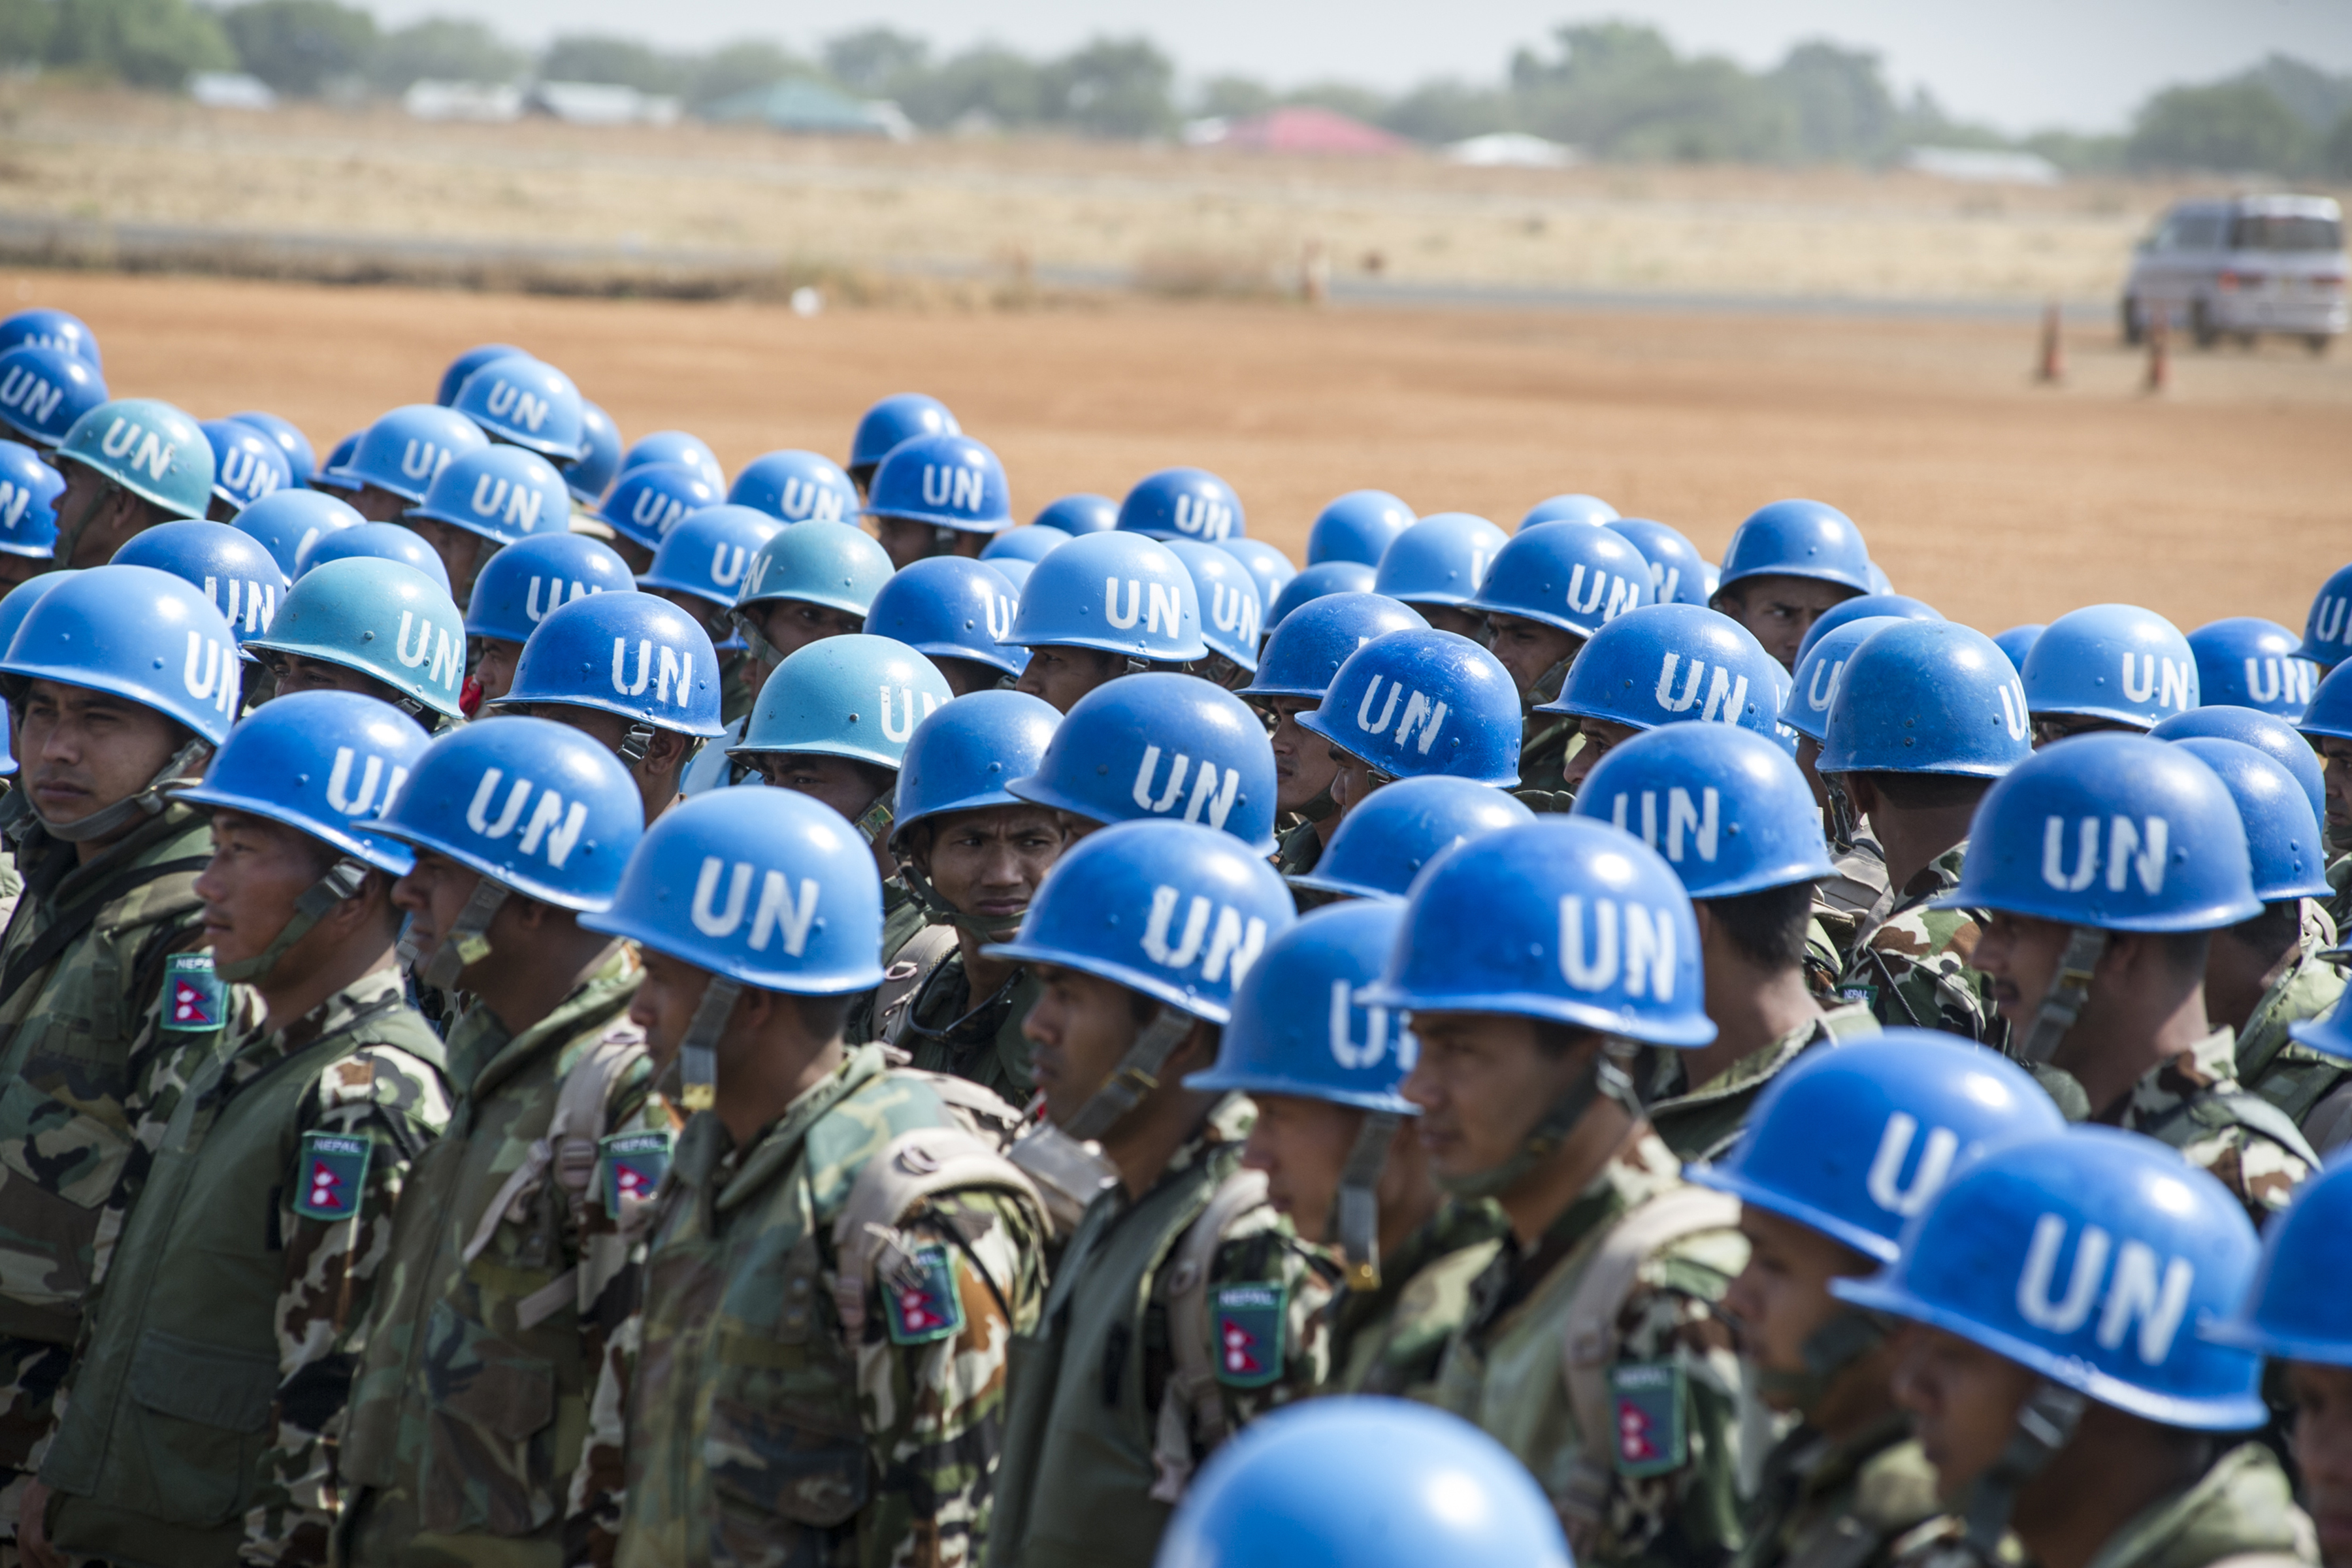 The United Nations Security Council voted to extend its peacekeeping mission in South Sudan, despite abstentions from Russia and China